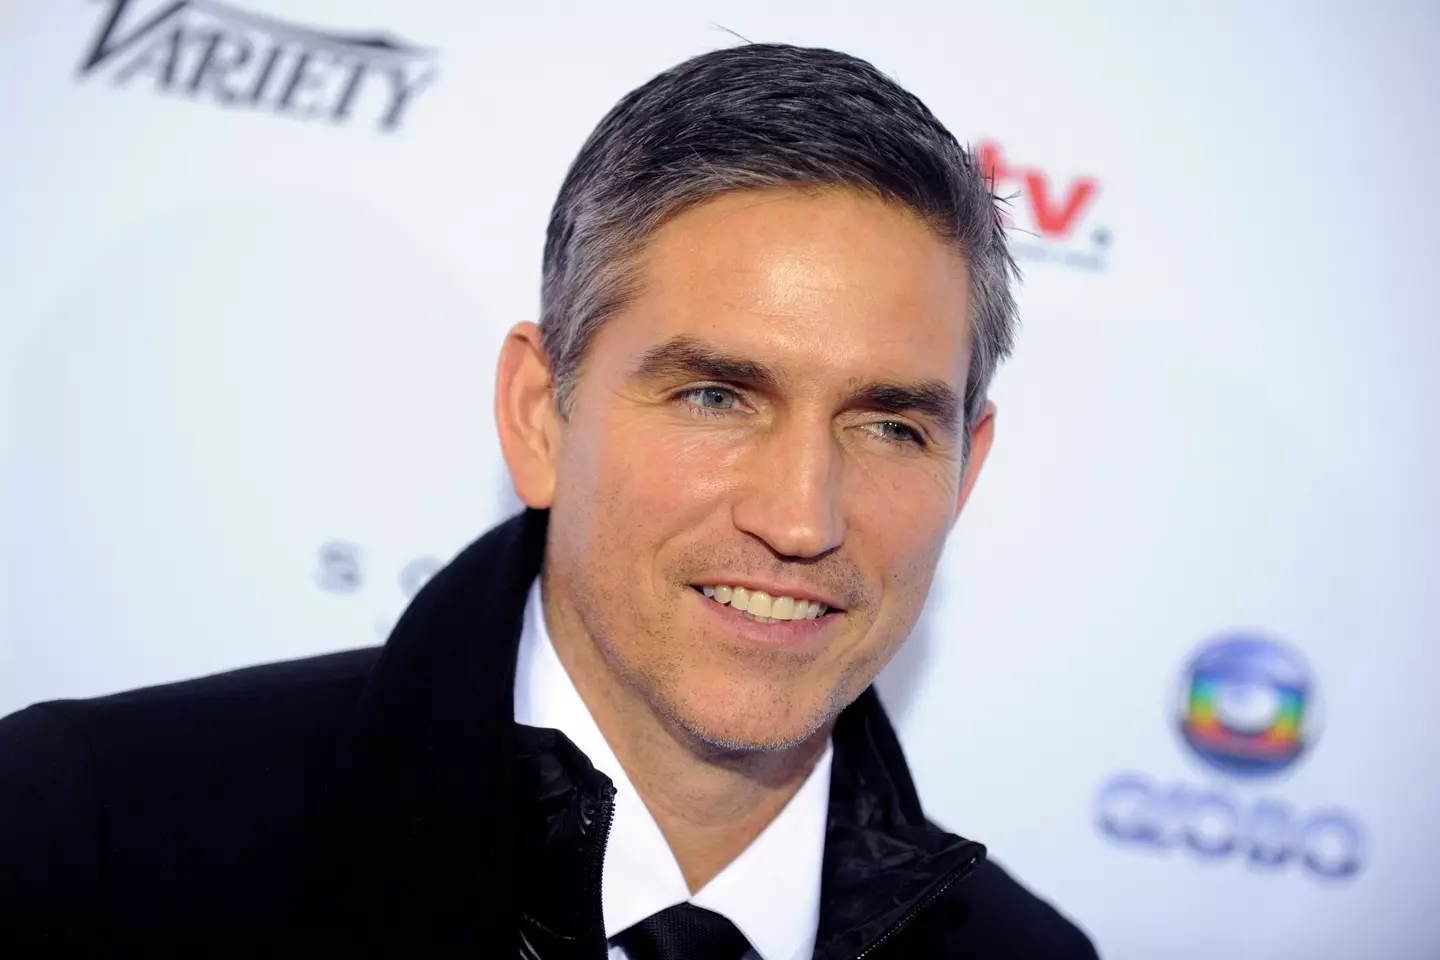 Lightning struck Caviezel twice during the making of the 2004 film.